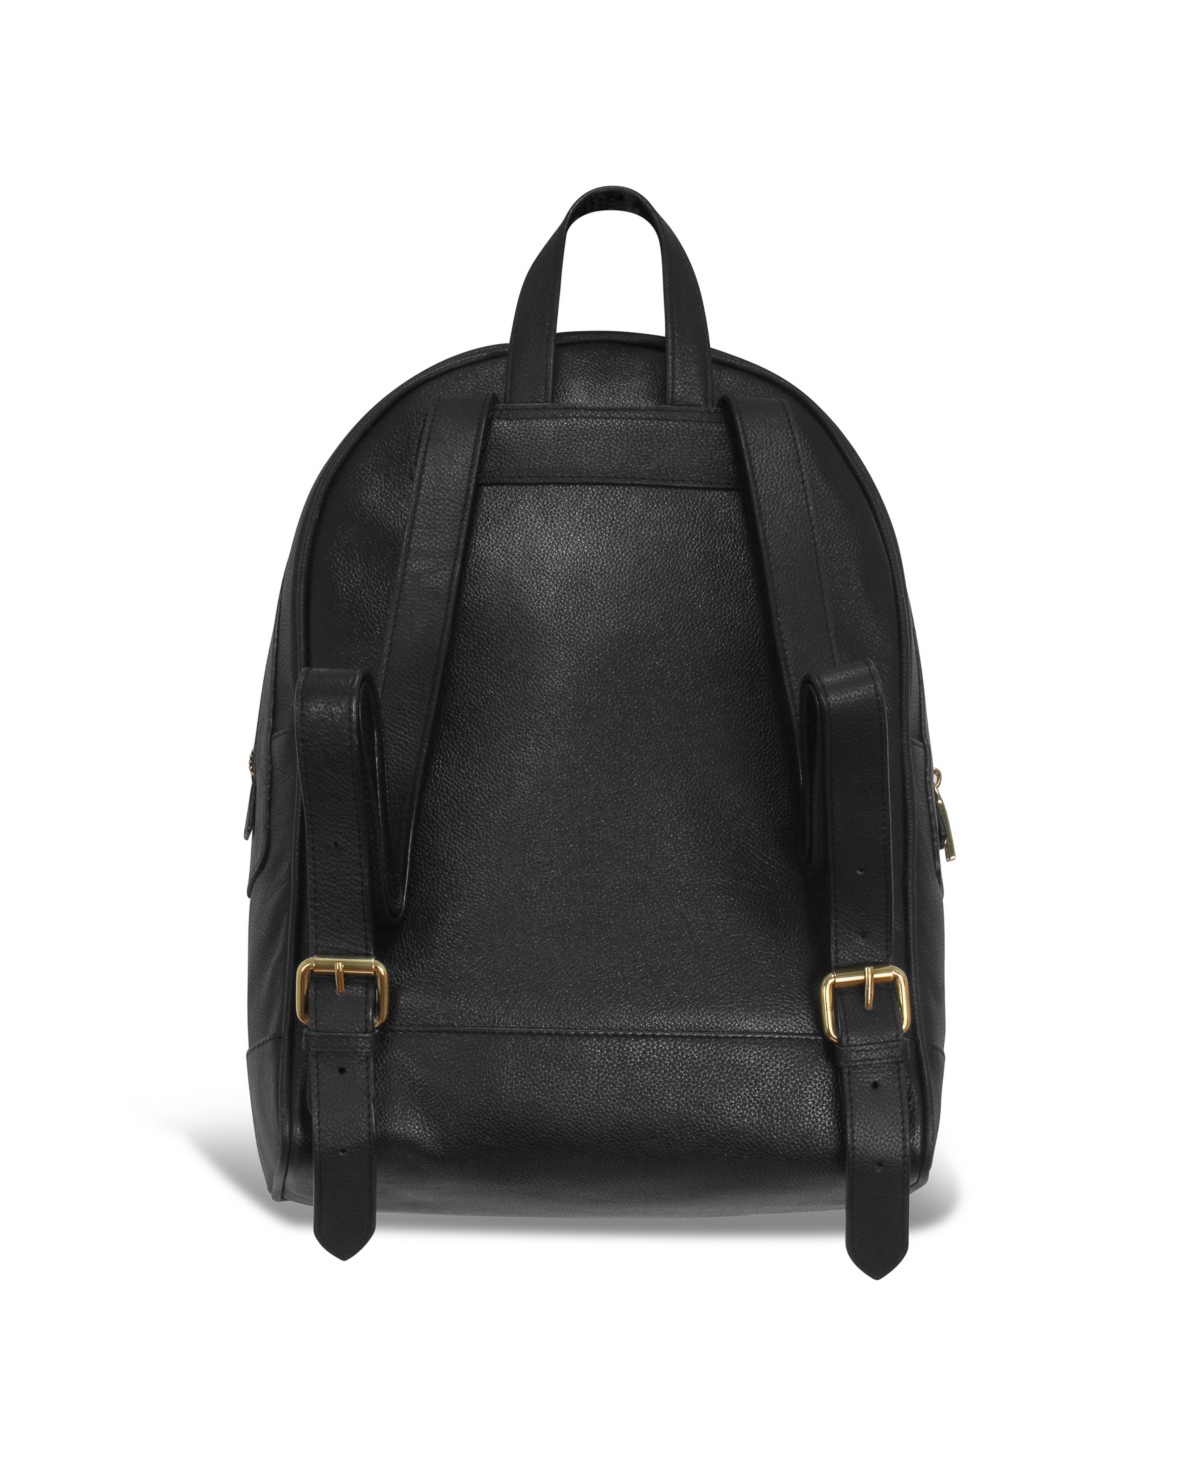 Shop Champs Leather Backpack In Black